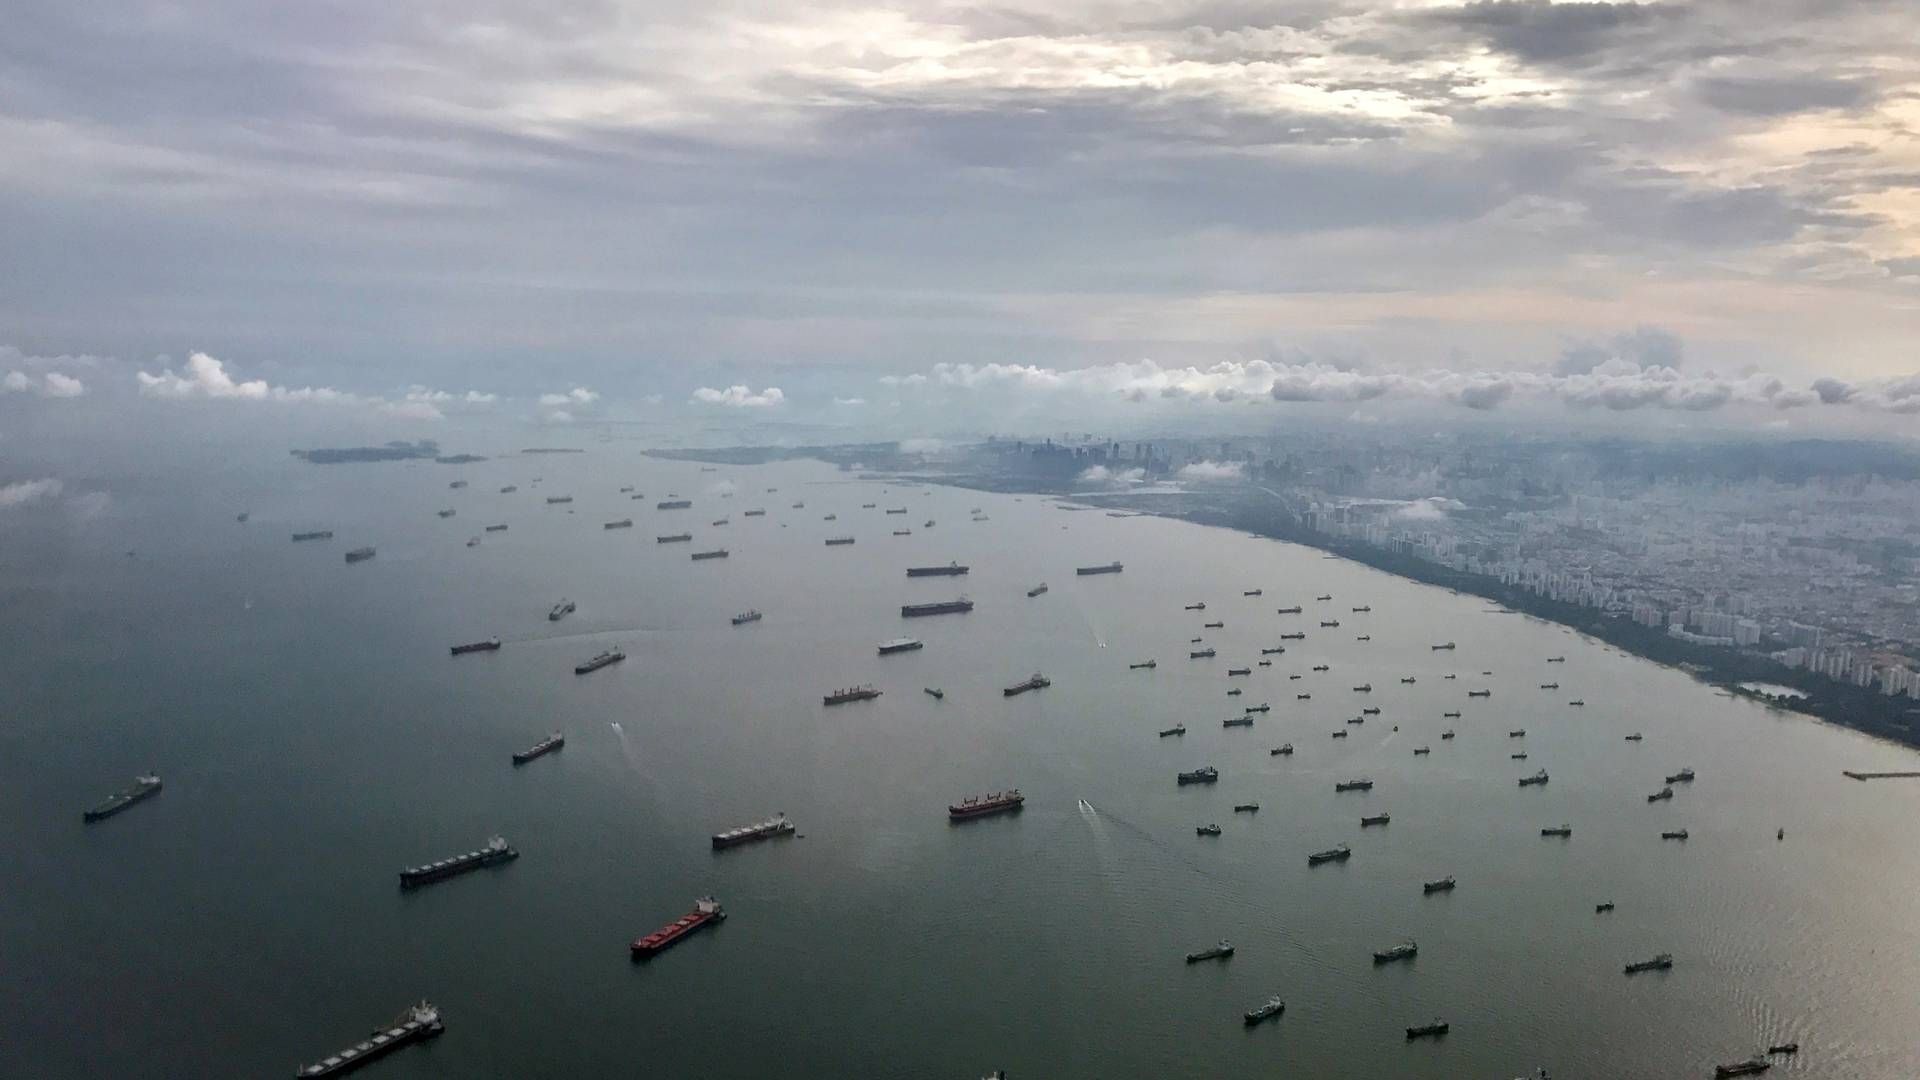 More than 1,000 ships pass through the waters of the Port of Singapore daily and is the busiest transhipment hub for the container market with a throughput of 39 million teu containers last year. | Photo: Jorge Silva/Reuters/Ritzau Scanpix